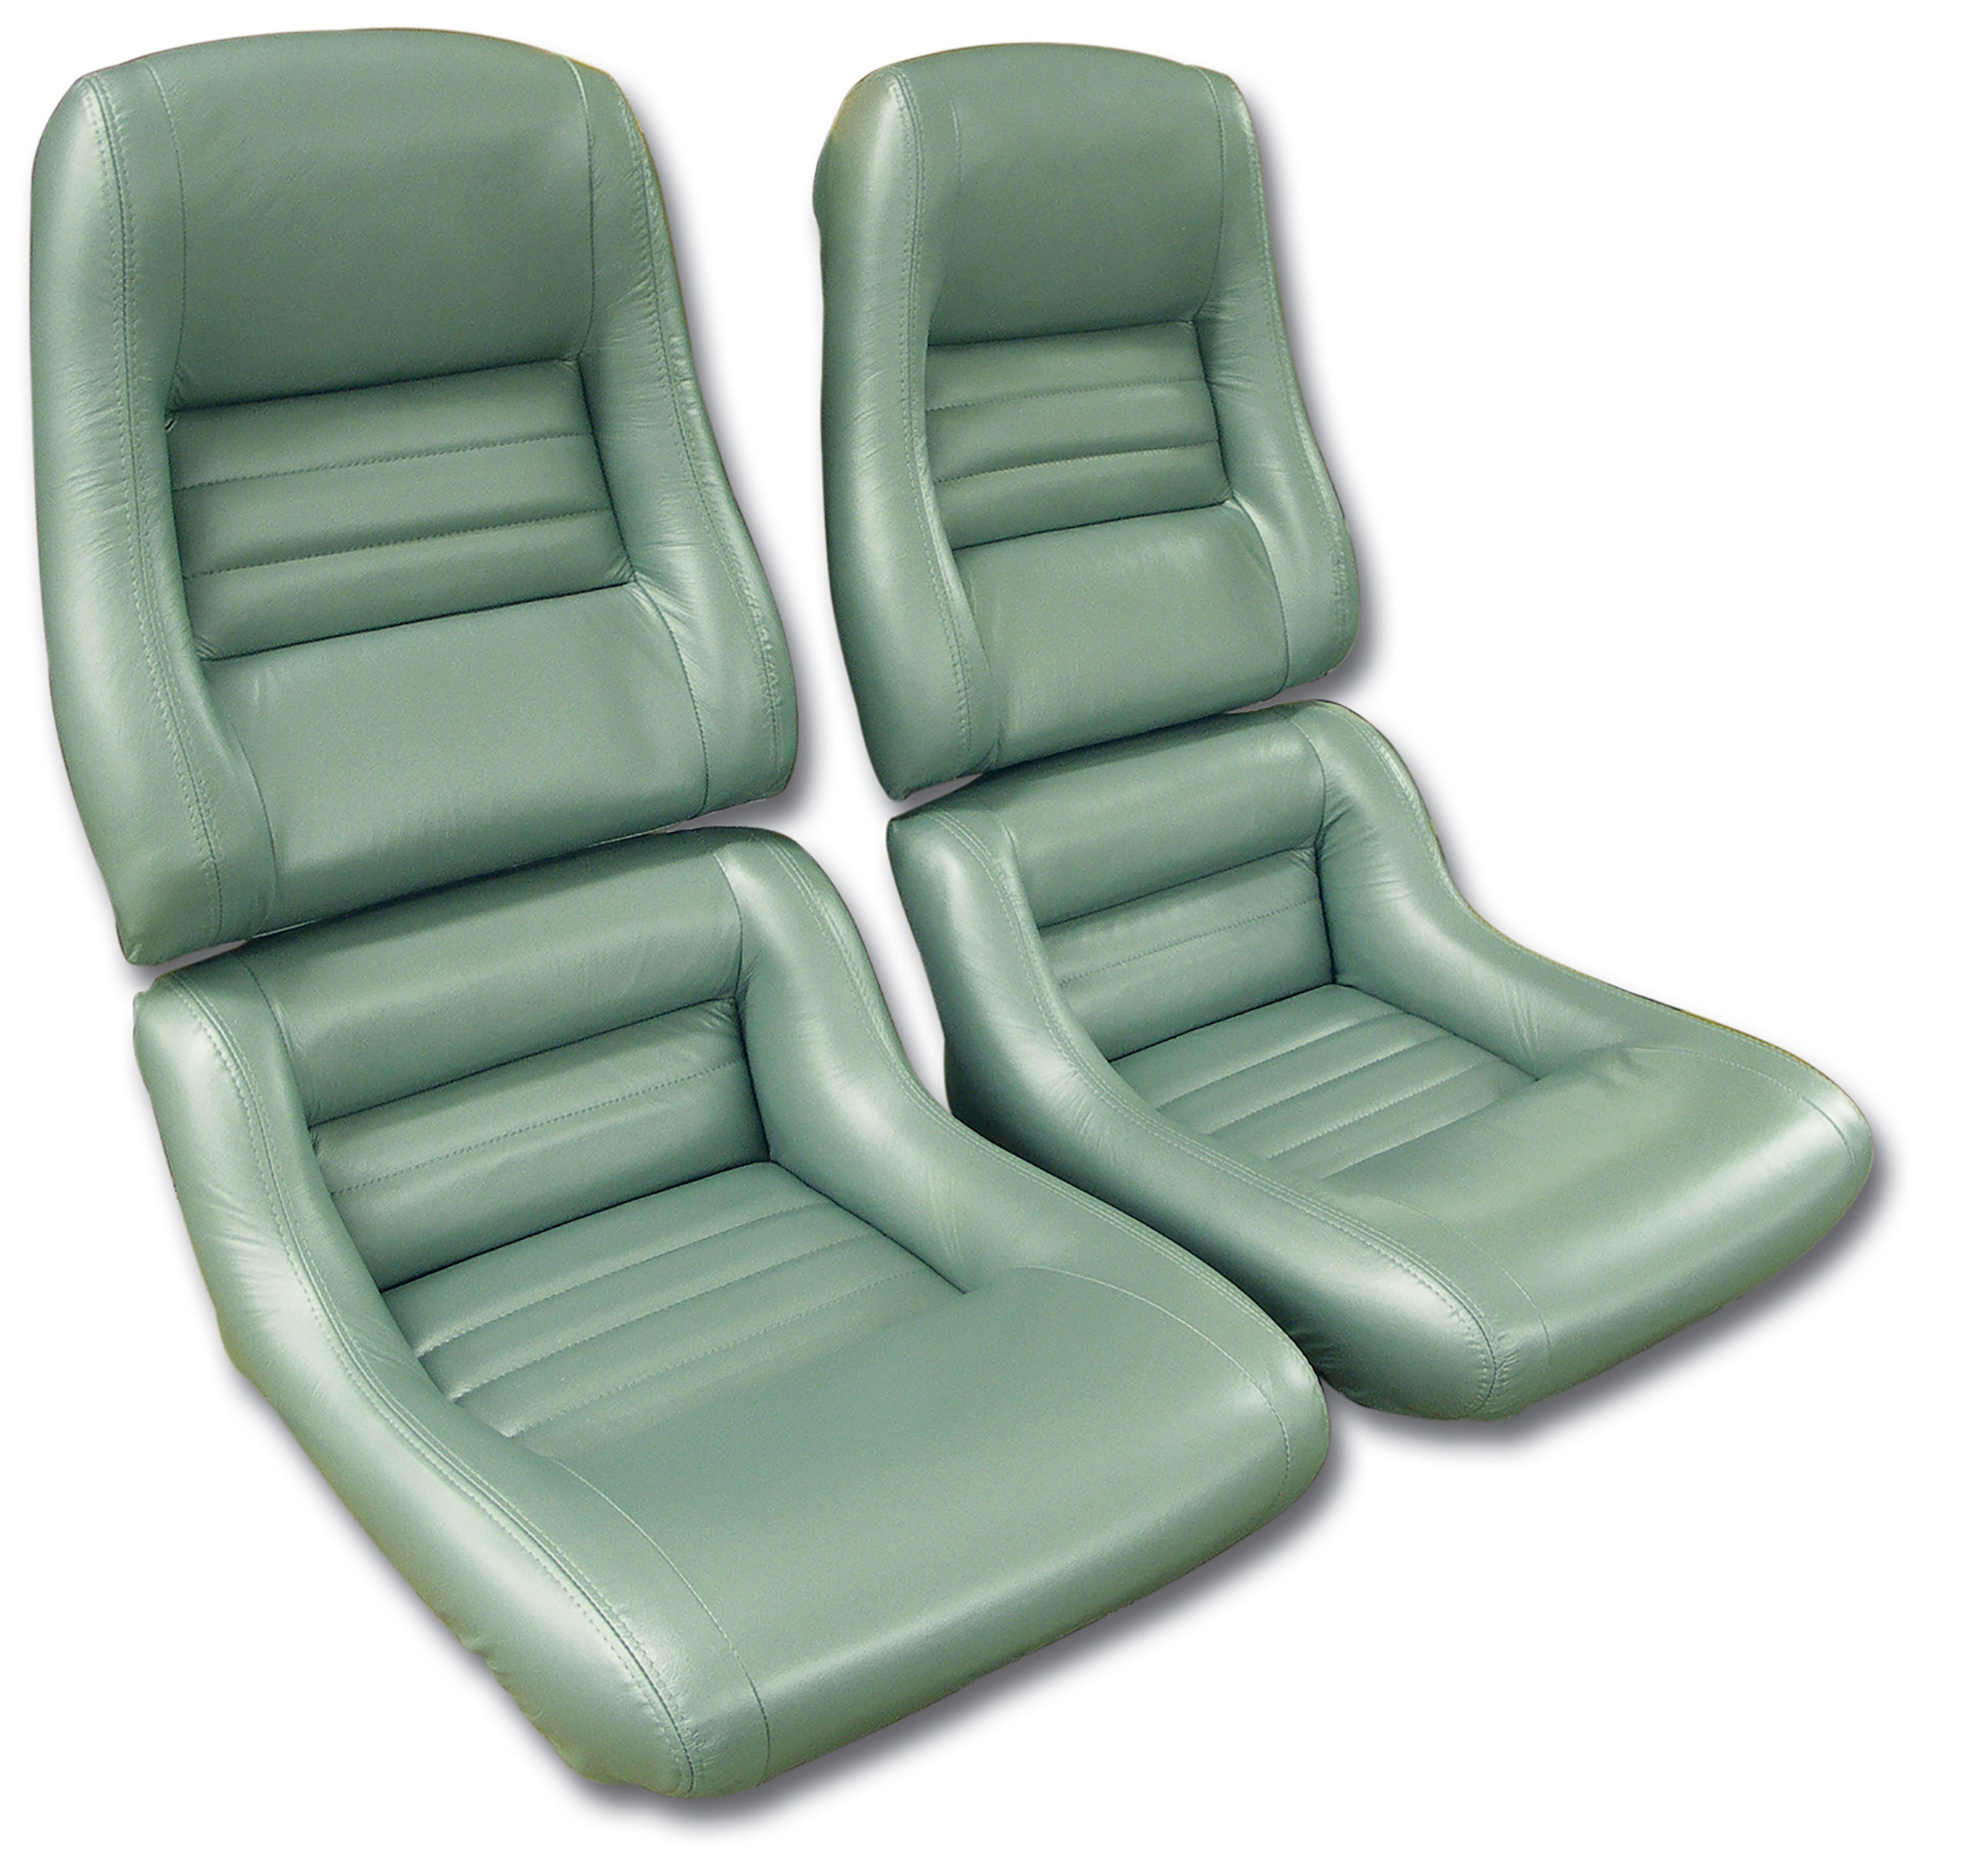 1982 Corvette C3 Leather Seat Covers Silvergreen 100%-Leather 2" Bolster CA-420059 